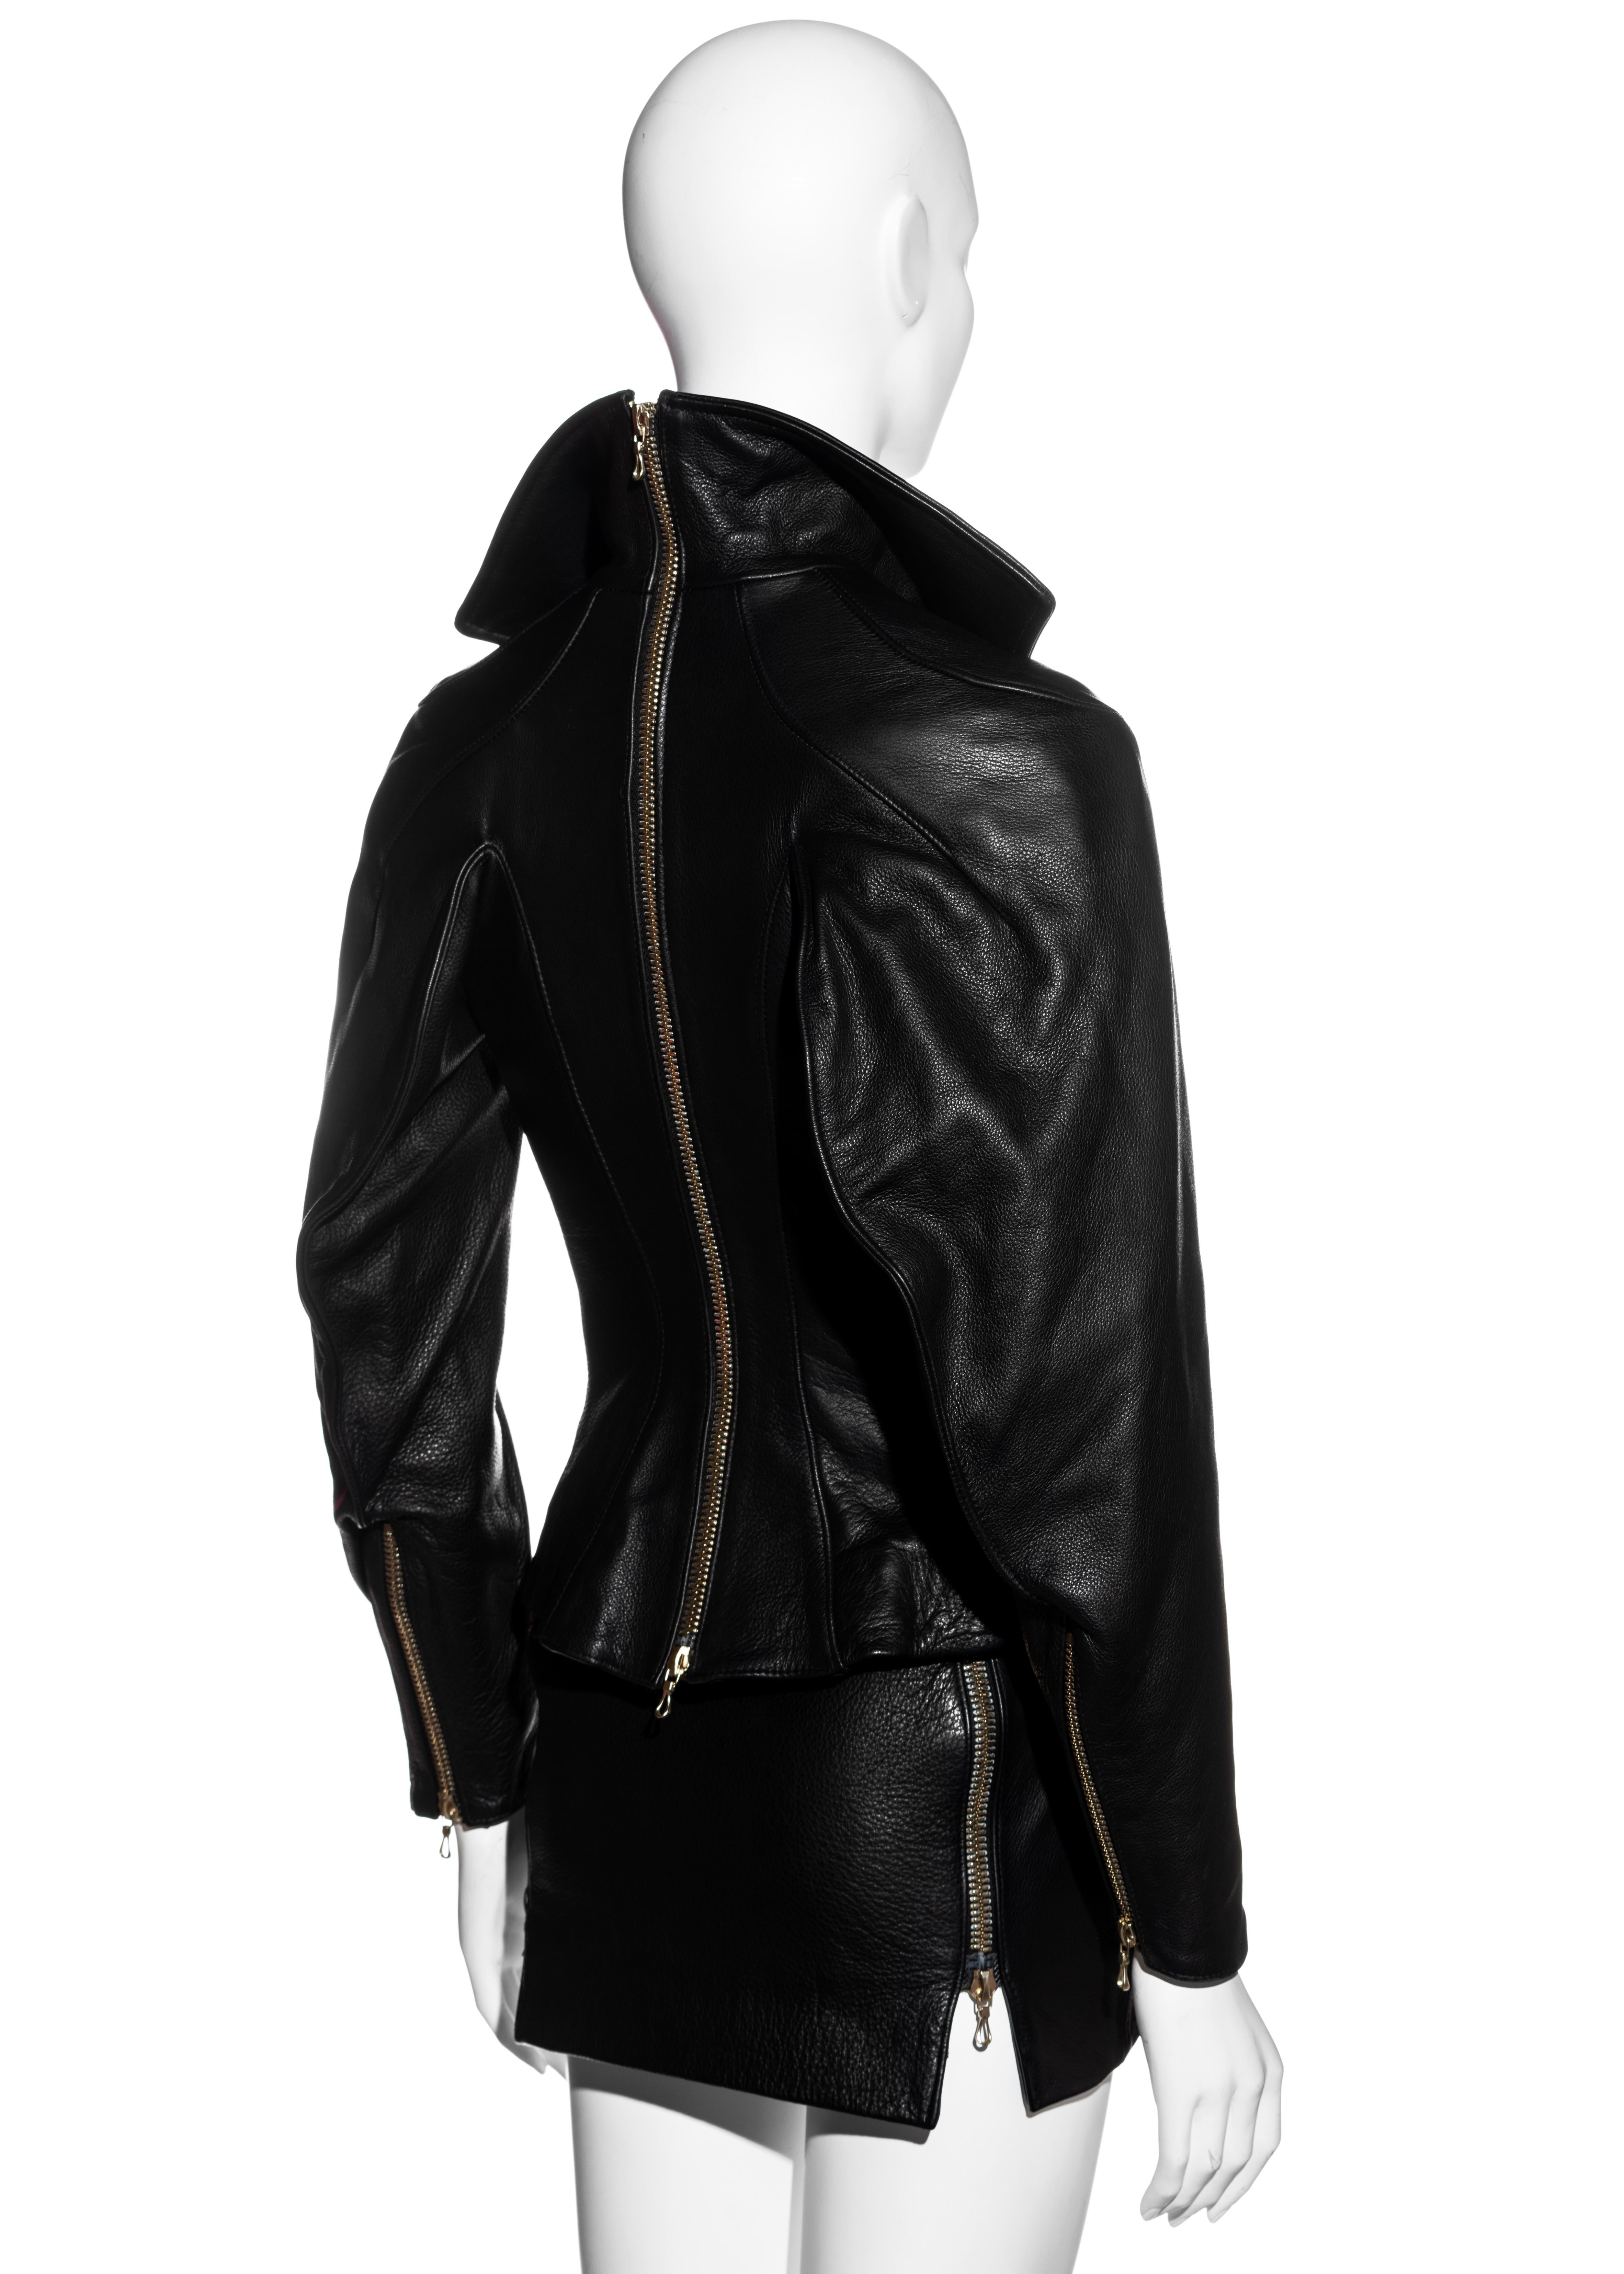 ▪ Vivienne Westwood Couture black leather mini skirt suit
▪ 100% Leather
▪ Corseted Jacket 
▪ Let of mutton sleeves
▪ Double ended metal zipper at centre back 
▪ Quilted satin lining 
▪ Micro mini skirt with two metal zippers at sides 
▪ UK 10 - FR